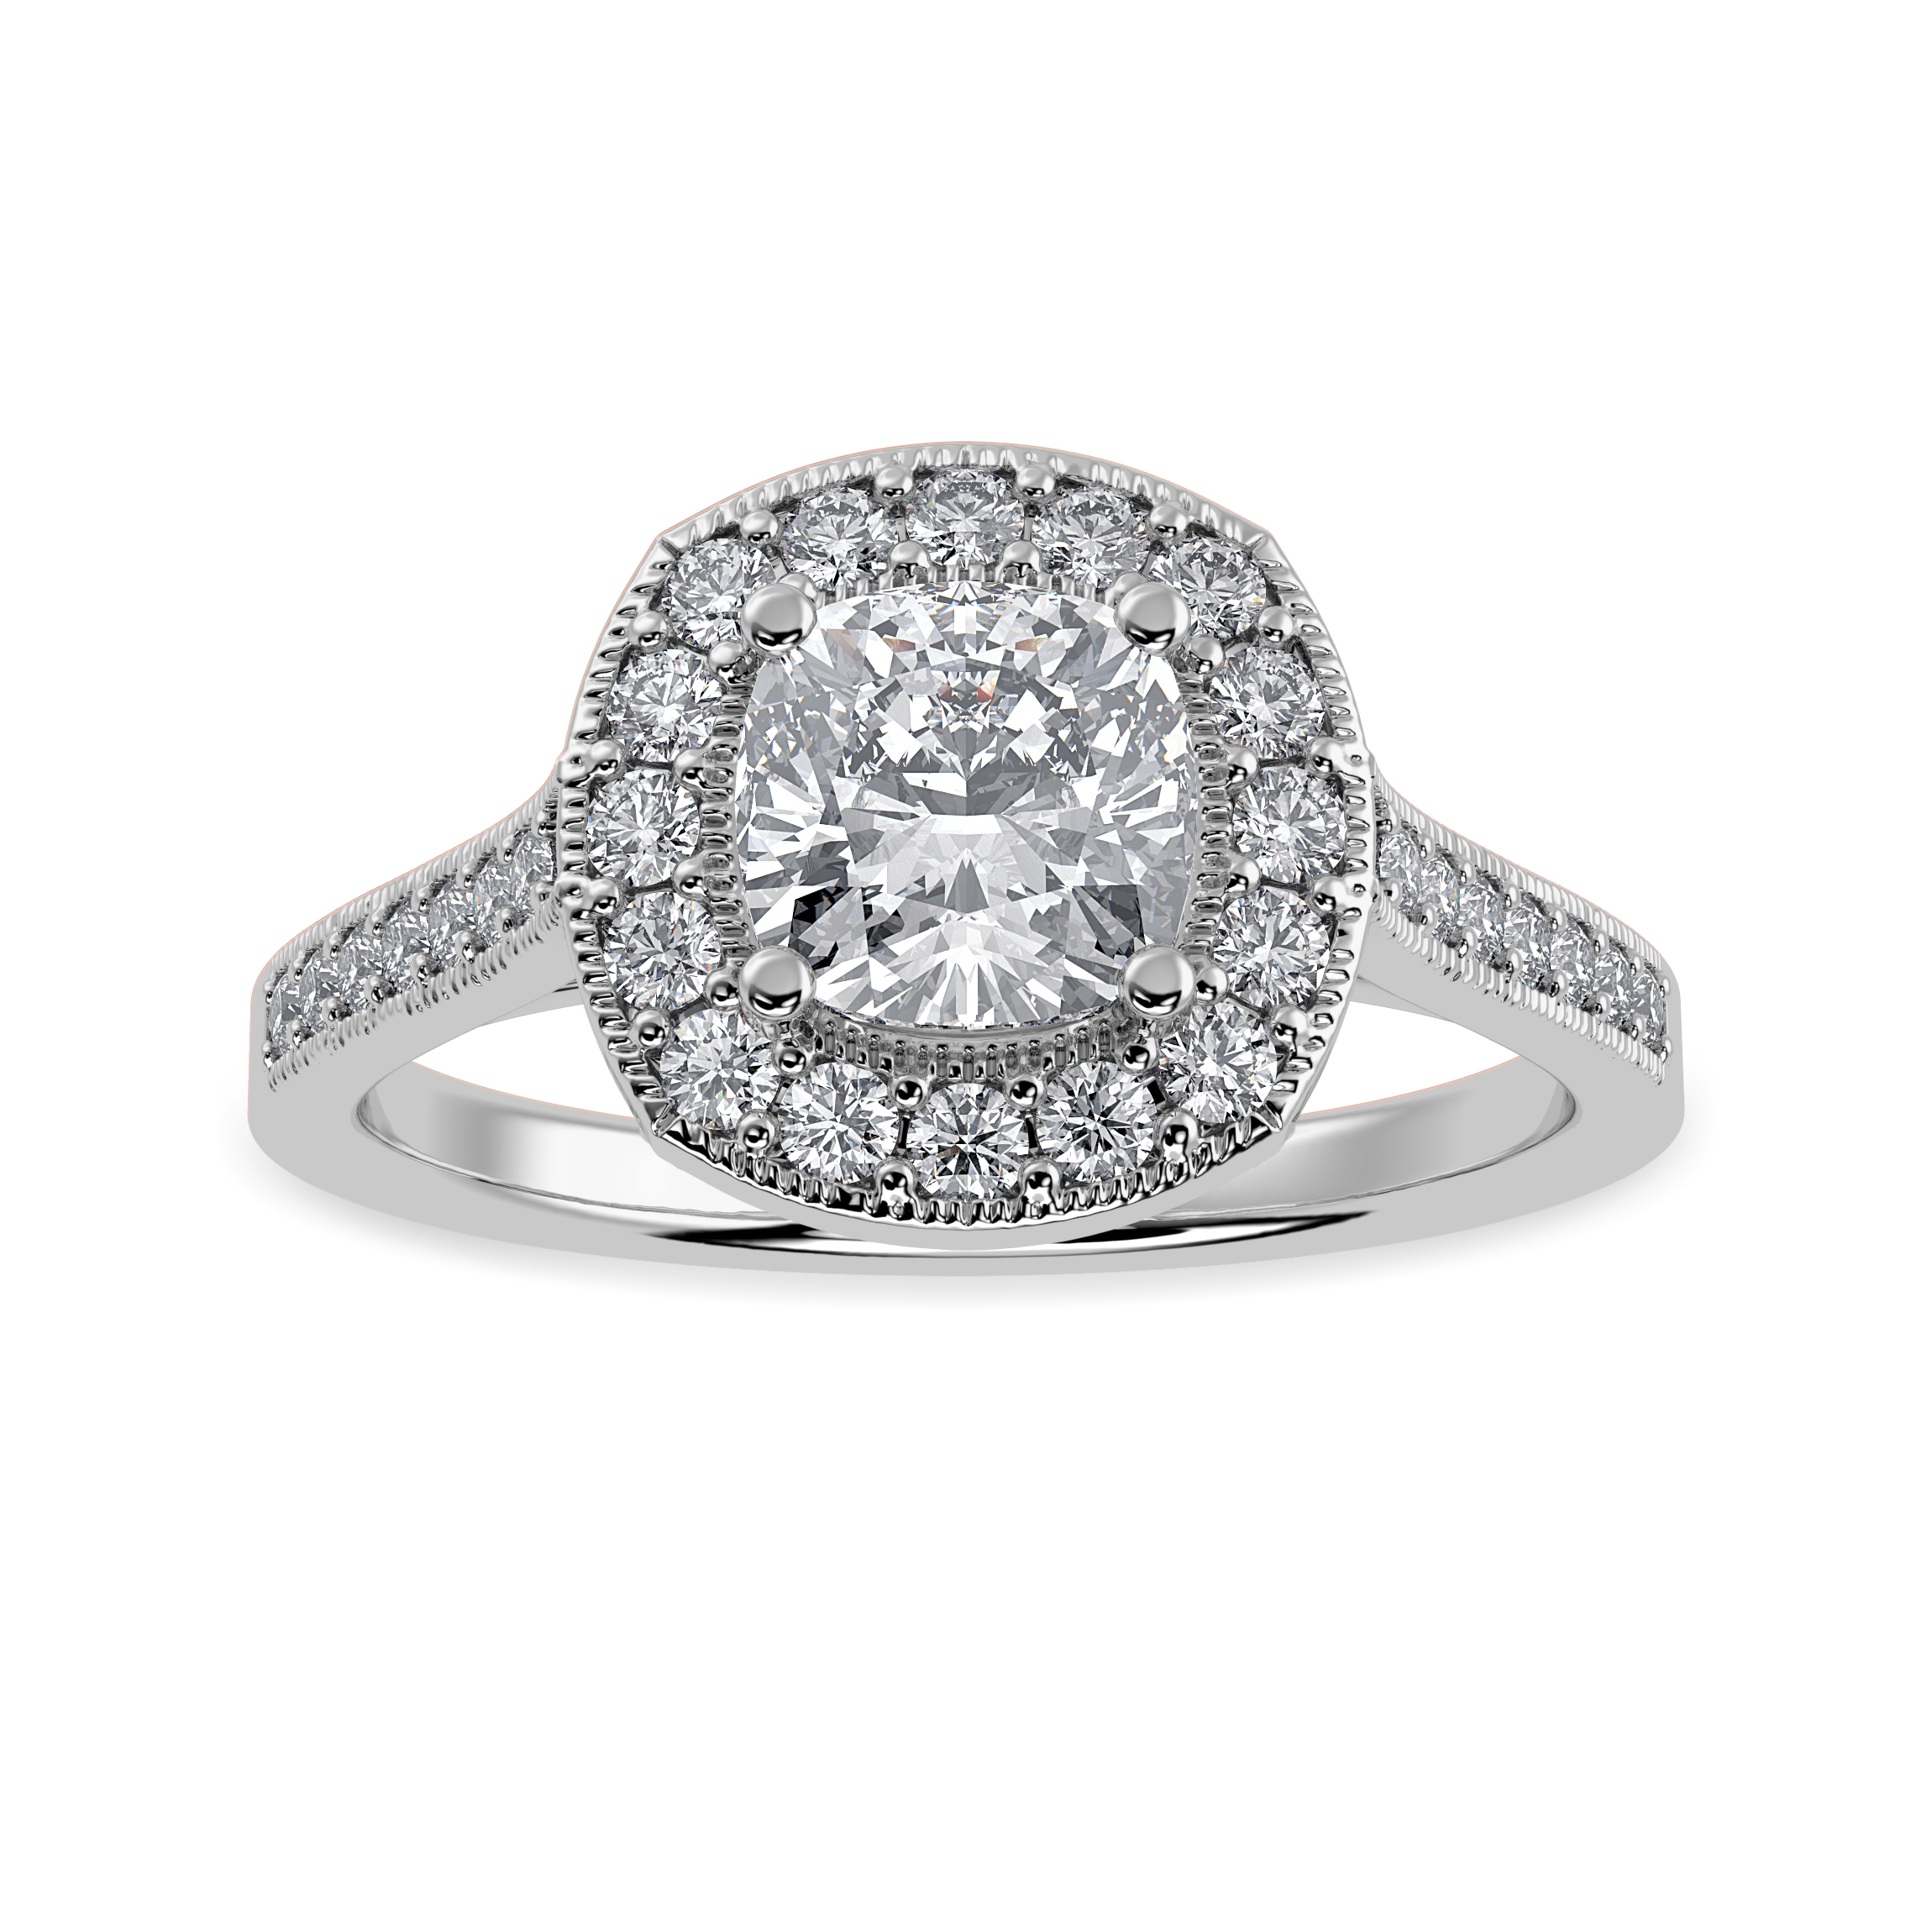 Cushion shaped diamond cluster engagement ring! My dream ring! Still can't  believe its mine! #… | Dream engagement rings, Big wedding rings, Future engagement  rings